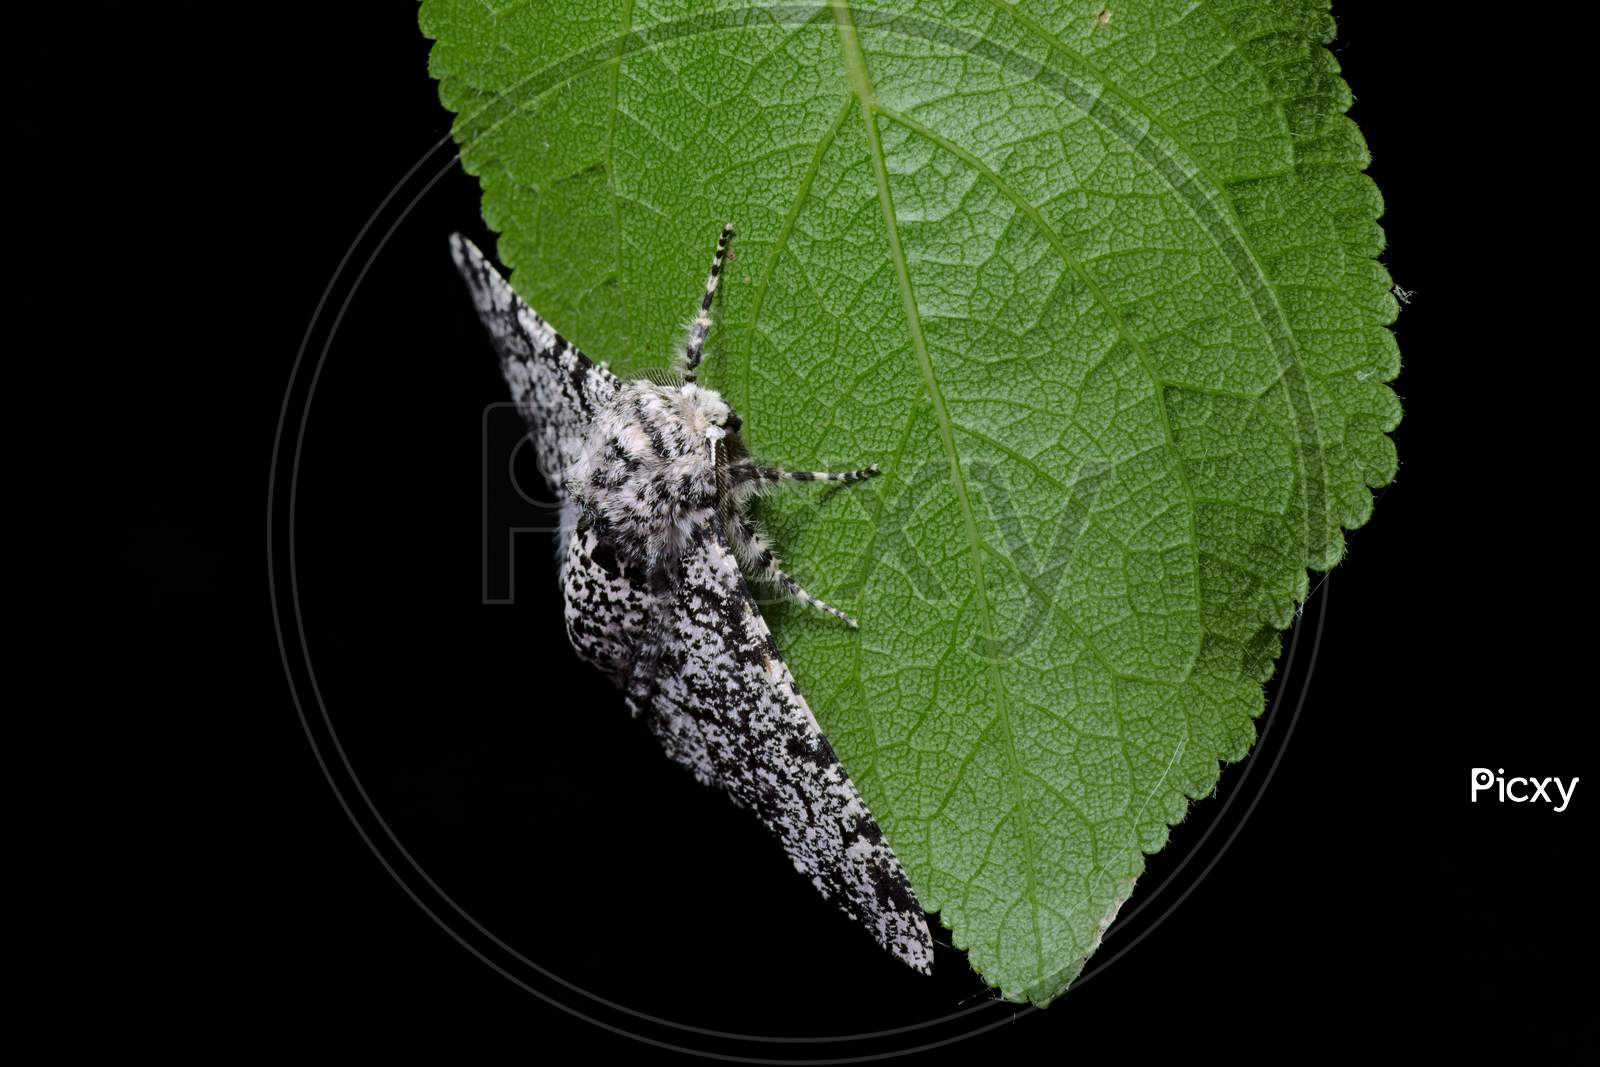 Detailed Macro Shows Body Patterning Of A Peppered Moth, And The Vein Structure Of A Deep Green Leaf.